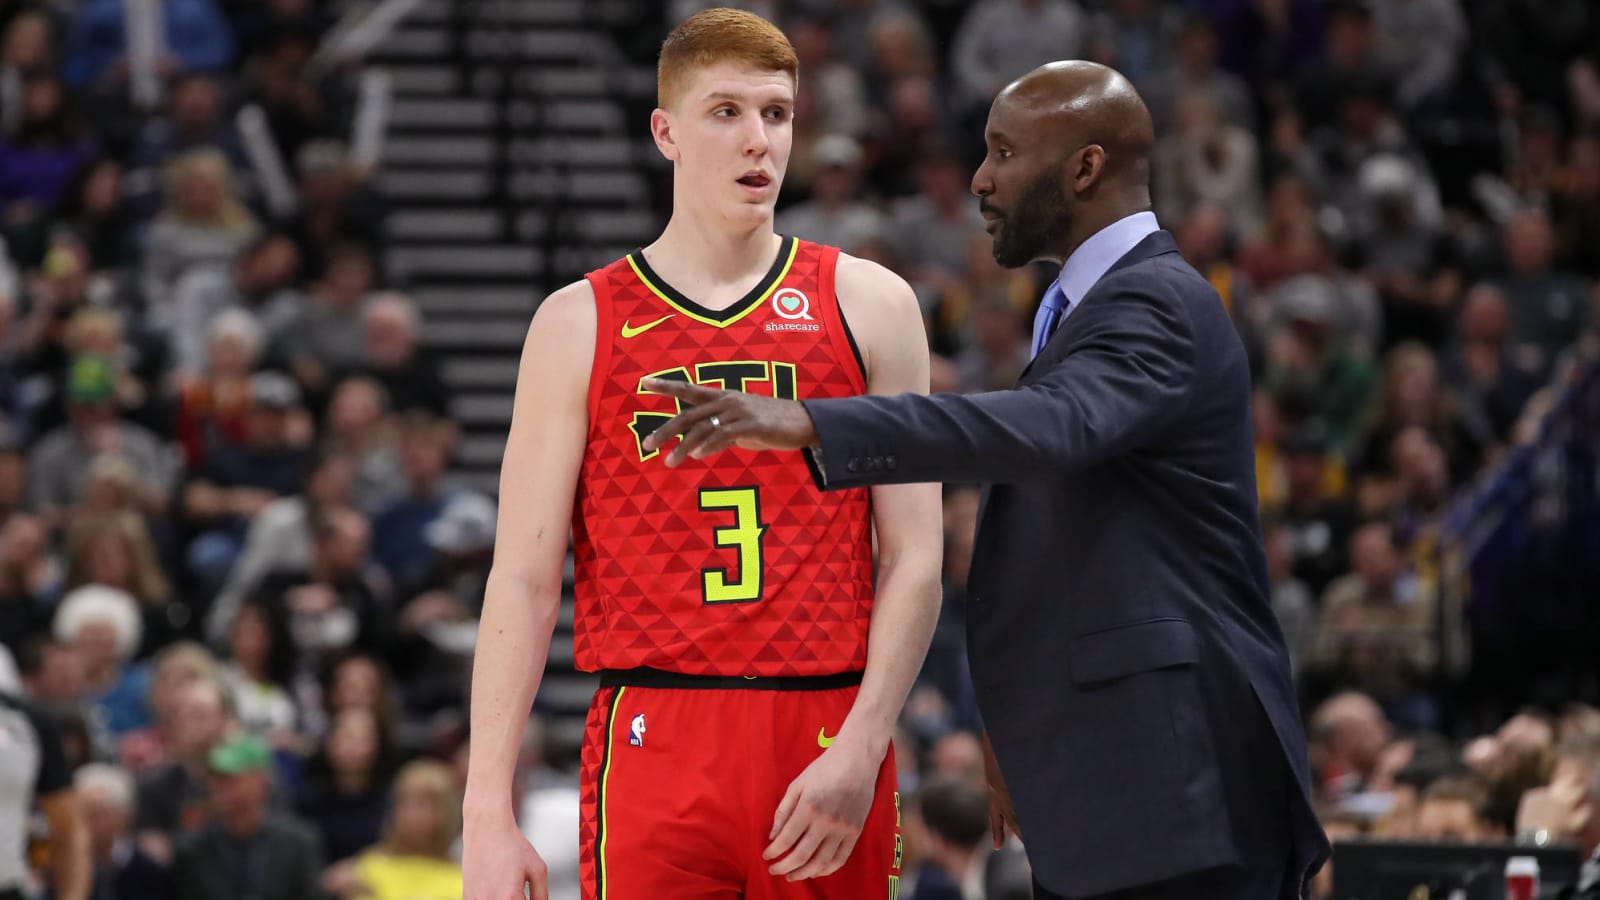 From warehouse to NBA arenas, Kevin Huerter keeps up with his shooting